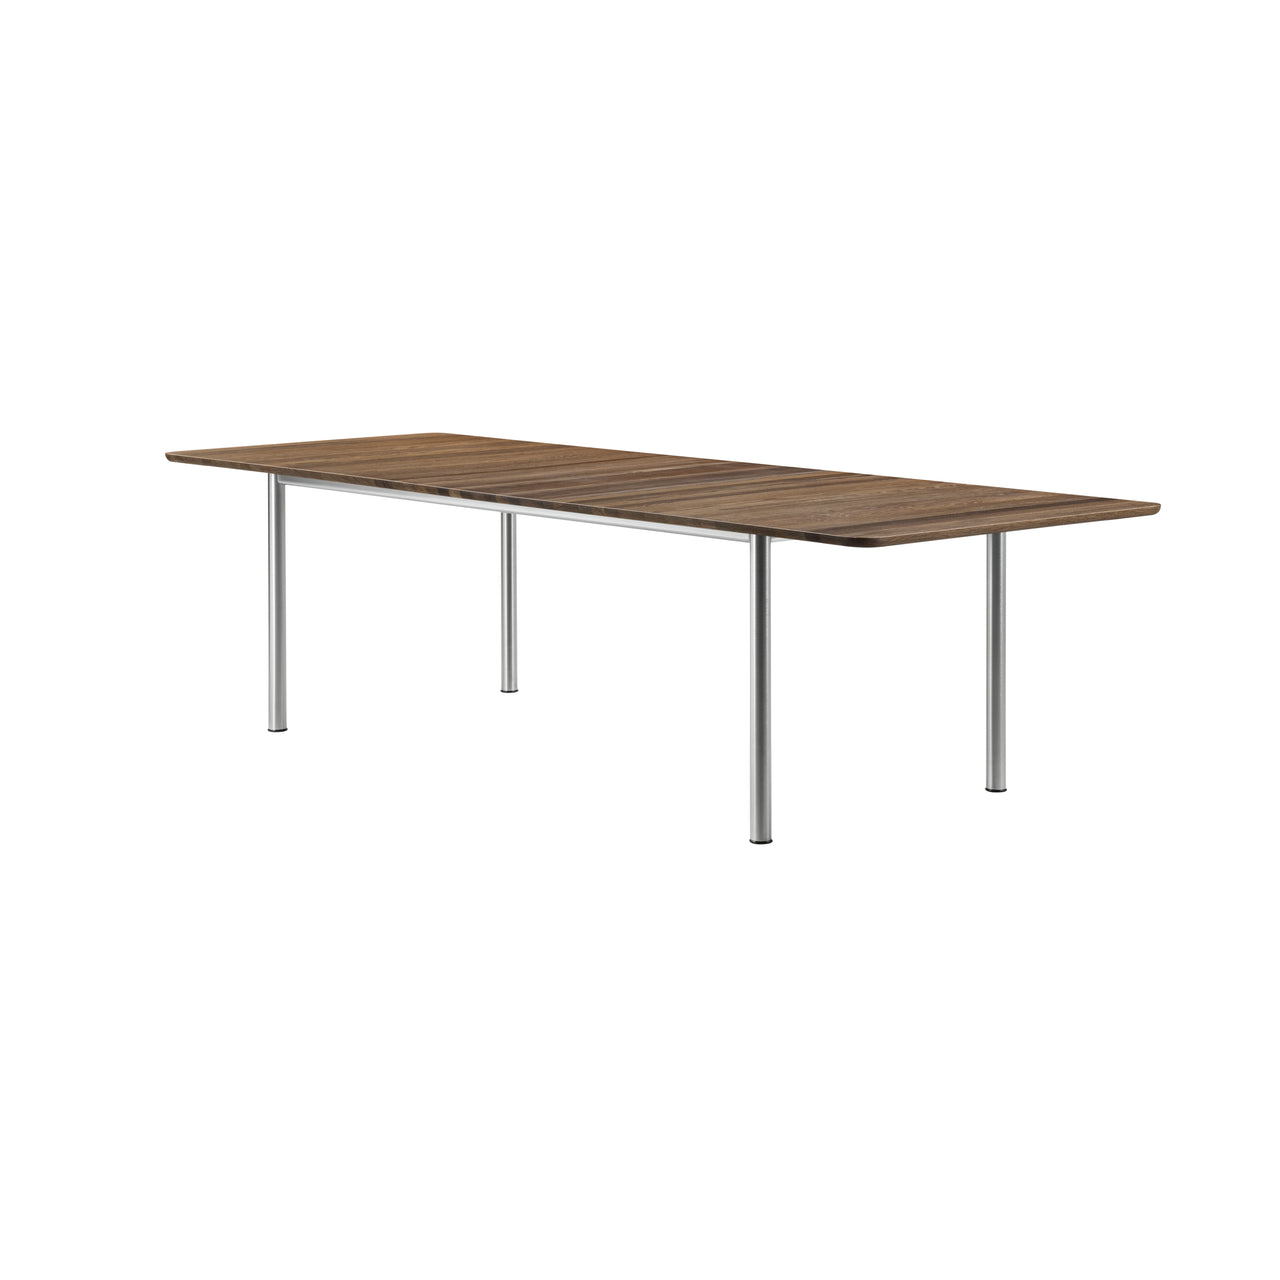 Plan Extendable Table: Smoked Oiled Oak + Brushed Steel